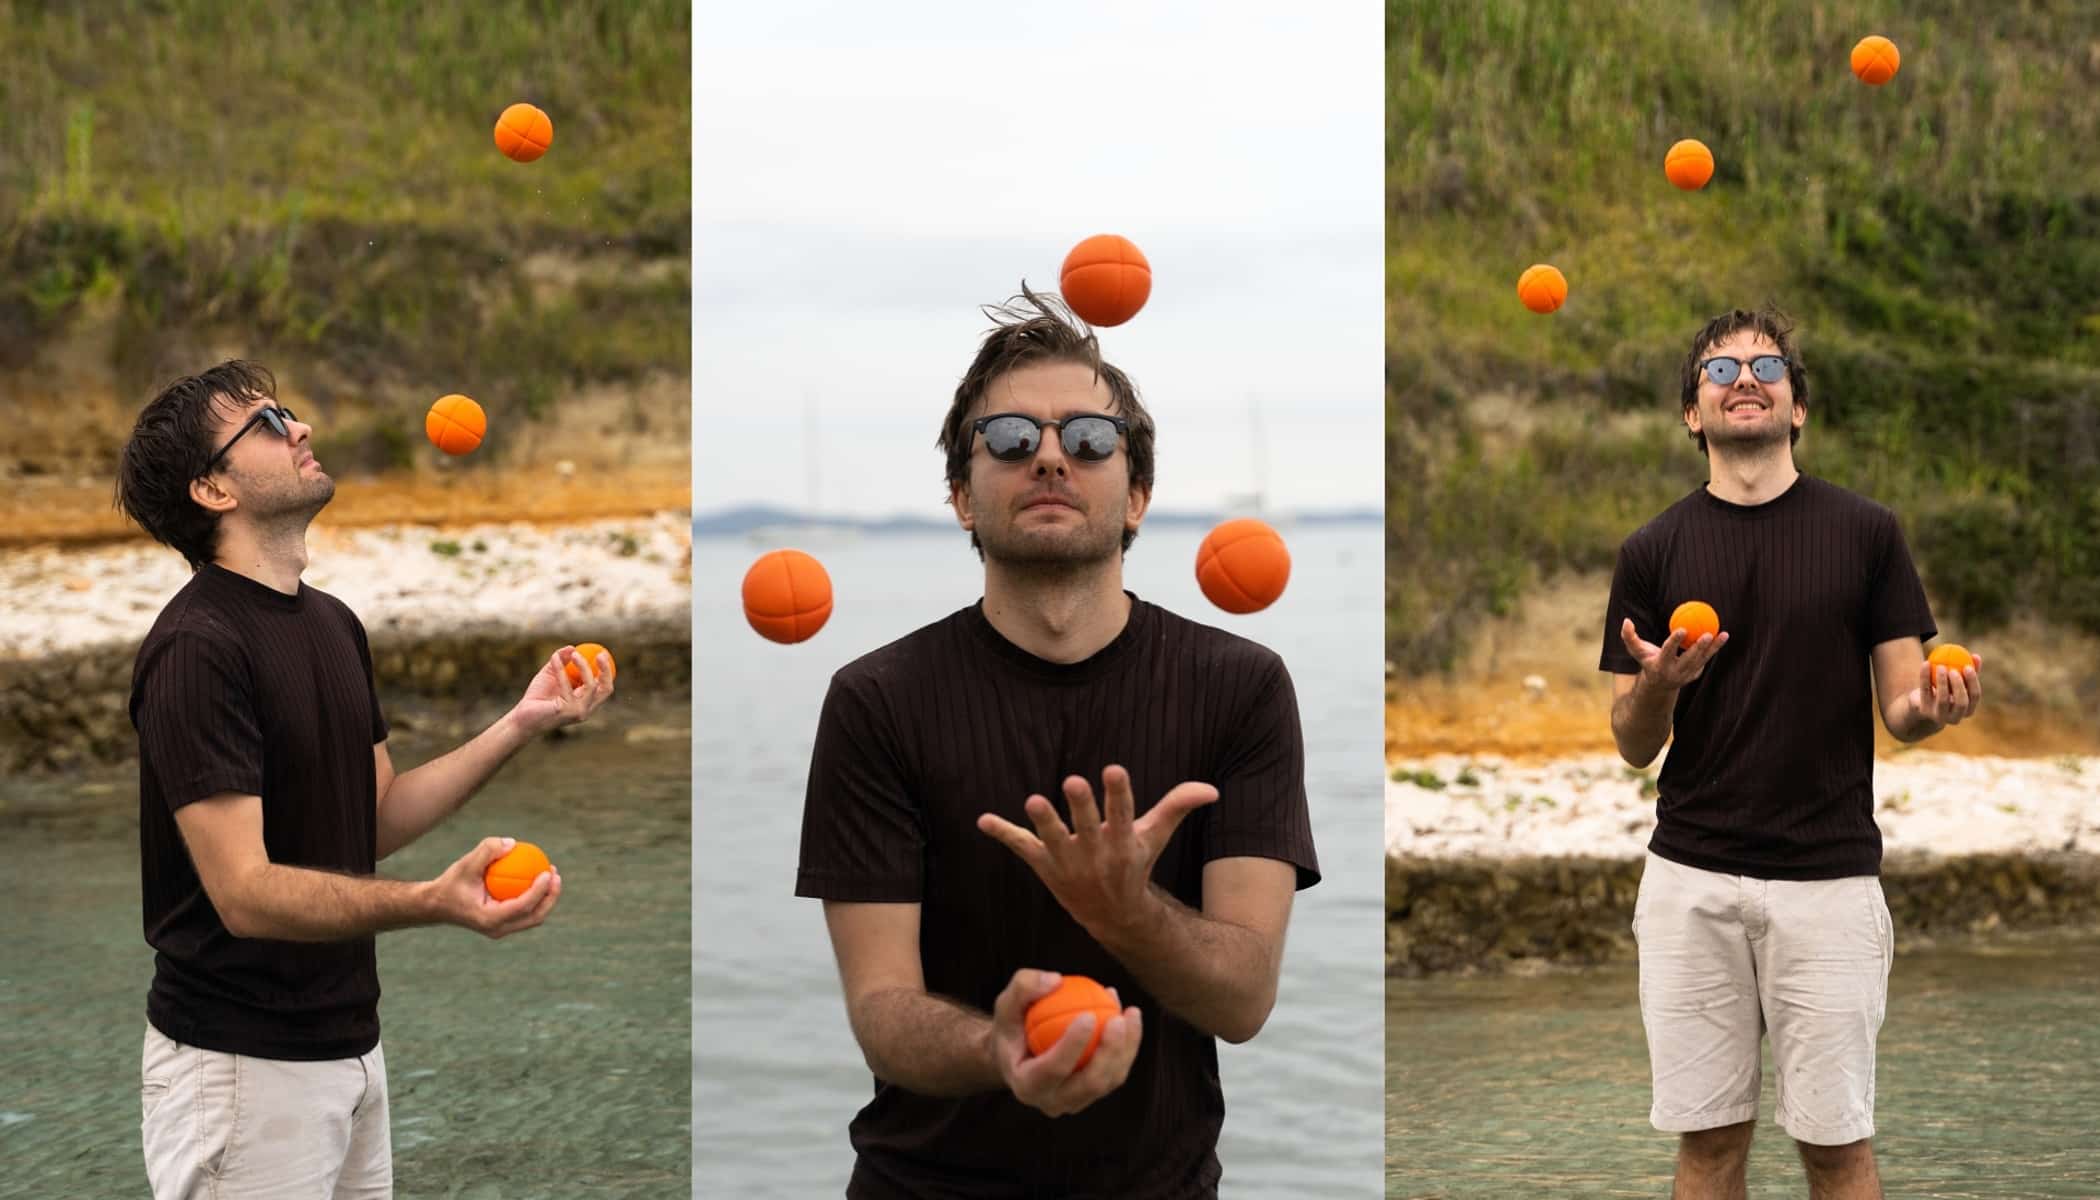 Portraiture in Motion Demonstration with Juggling